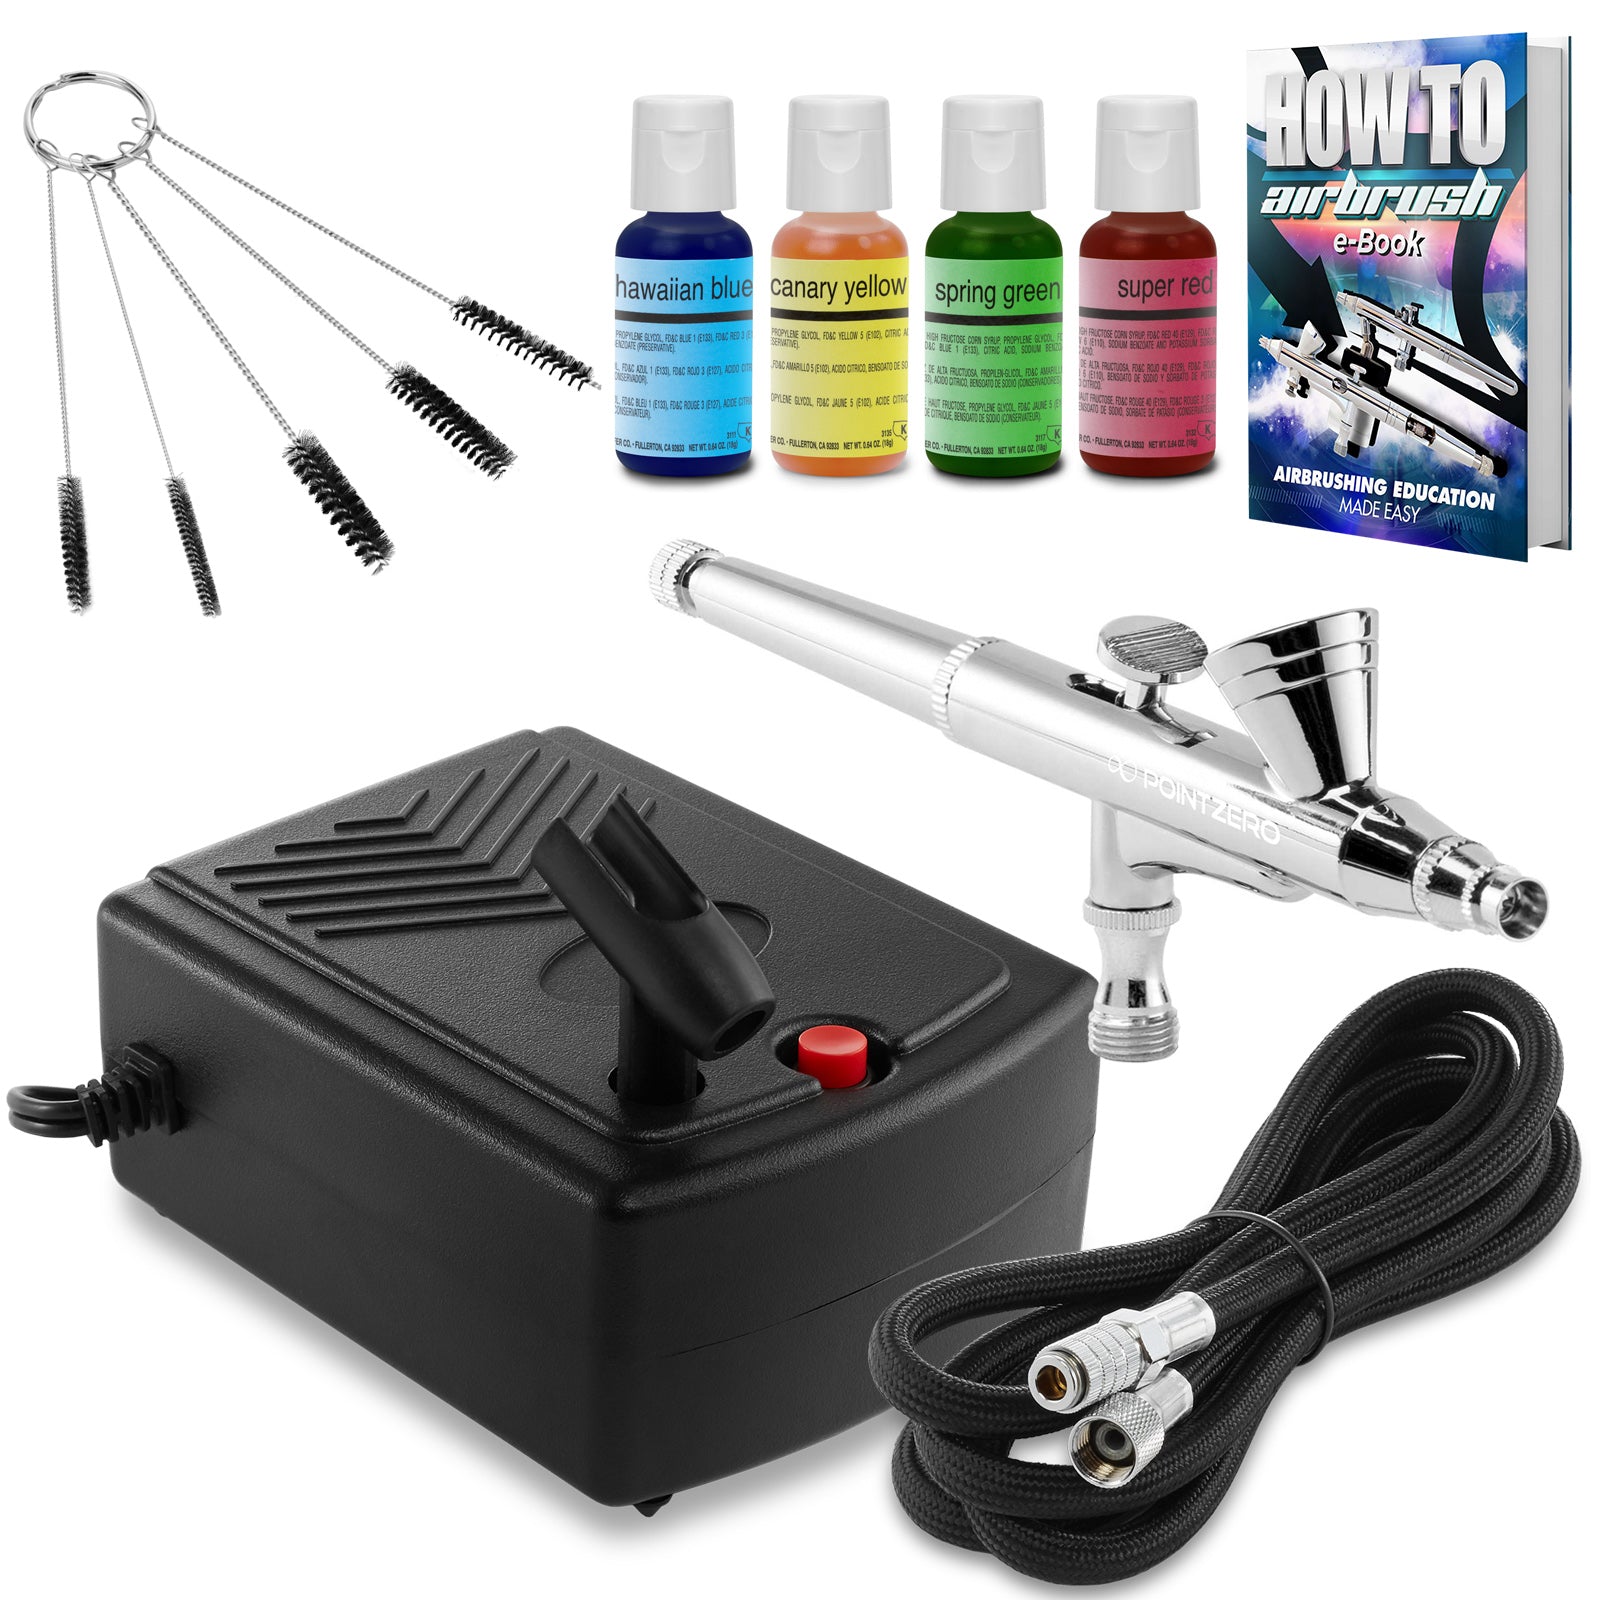 Airbrush for Cake Decorating Kit Cake Decoration Accessories Spray Gun With  Food Coloring Cake Decorating Tools